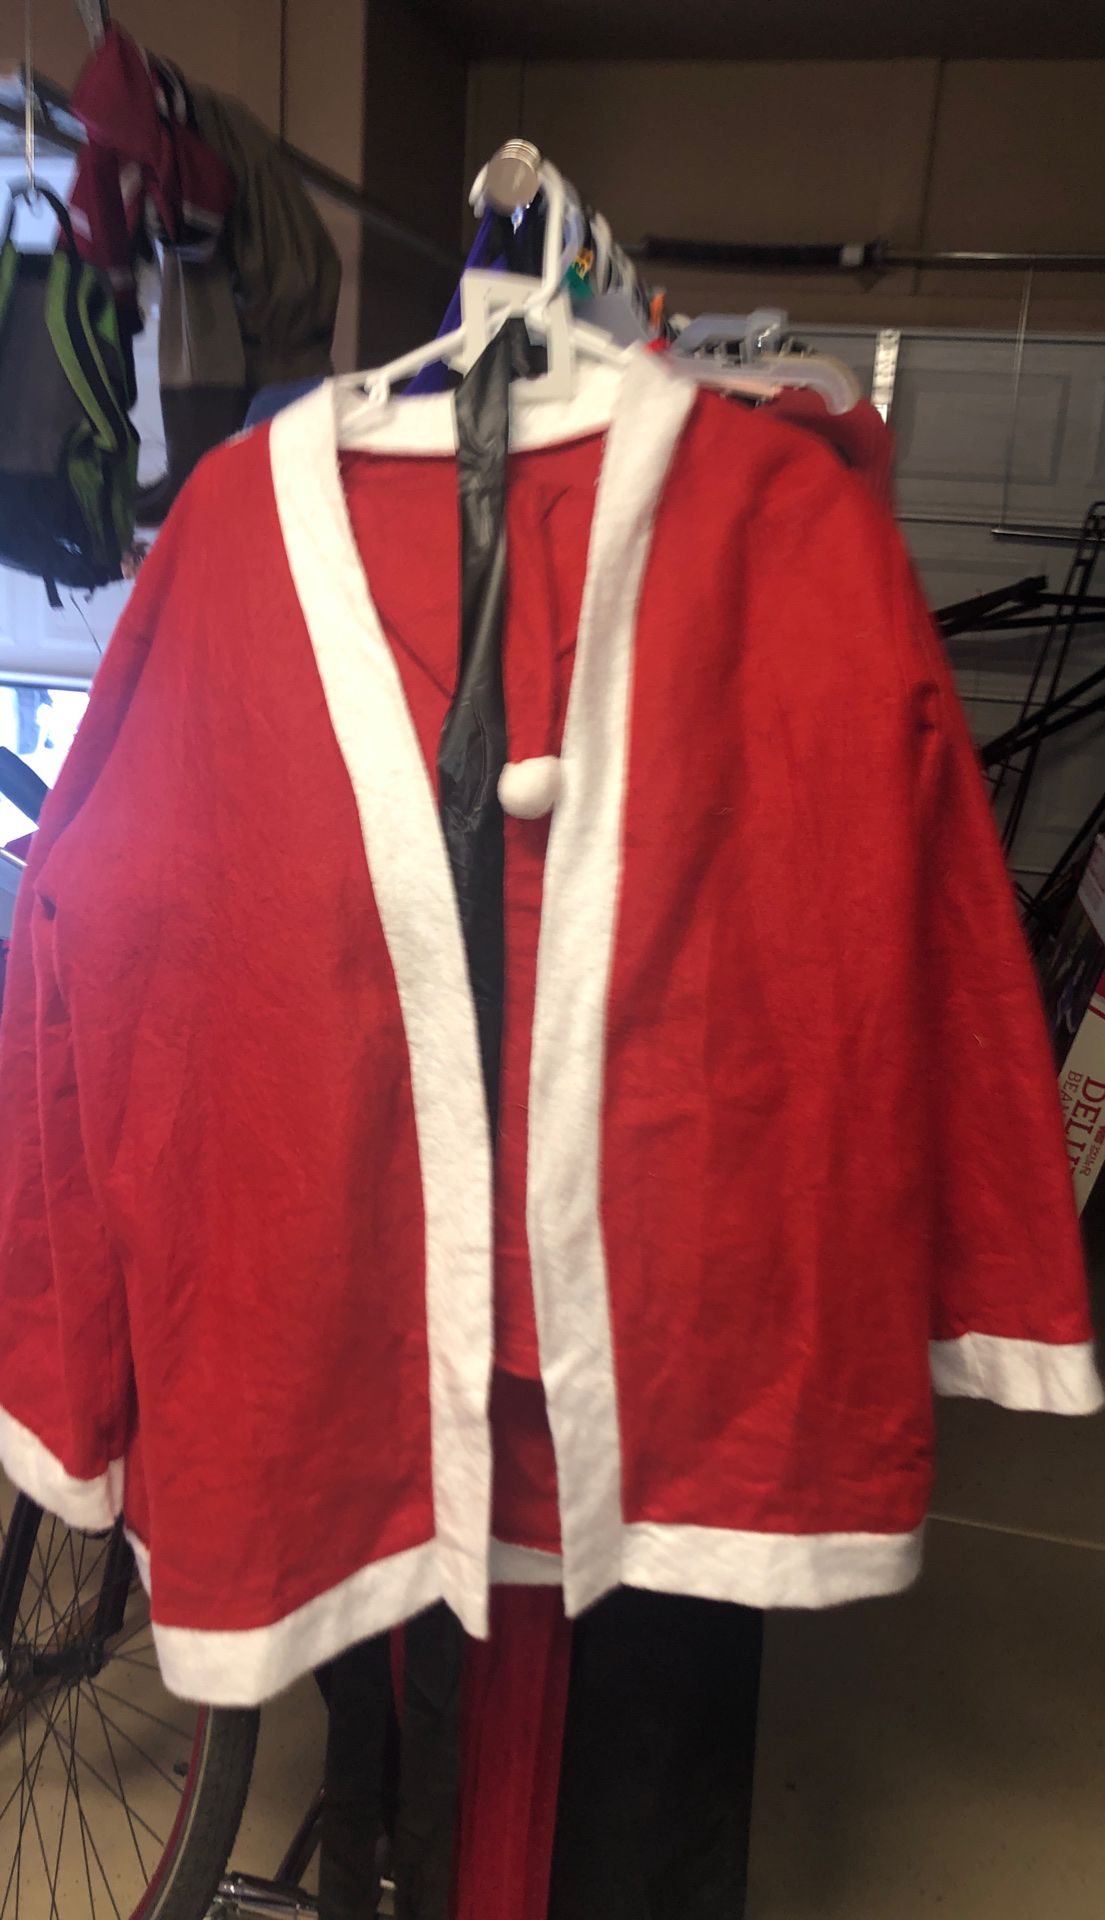 Christmas Santa Claus outfit/costume